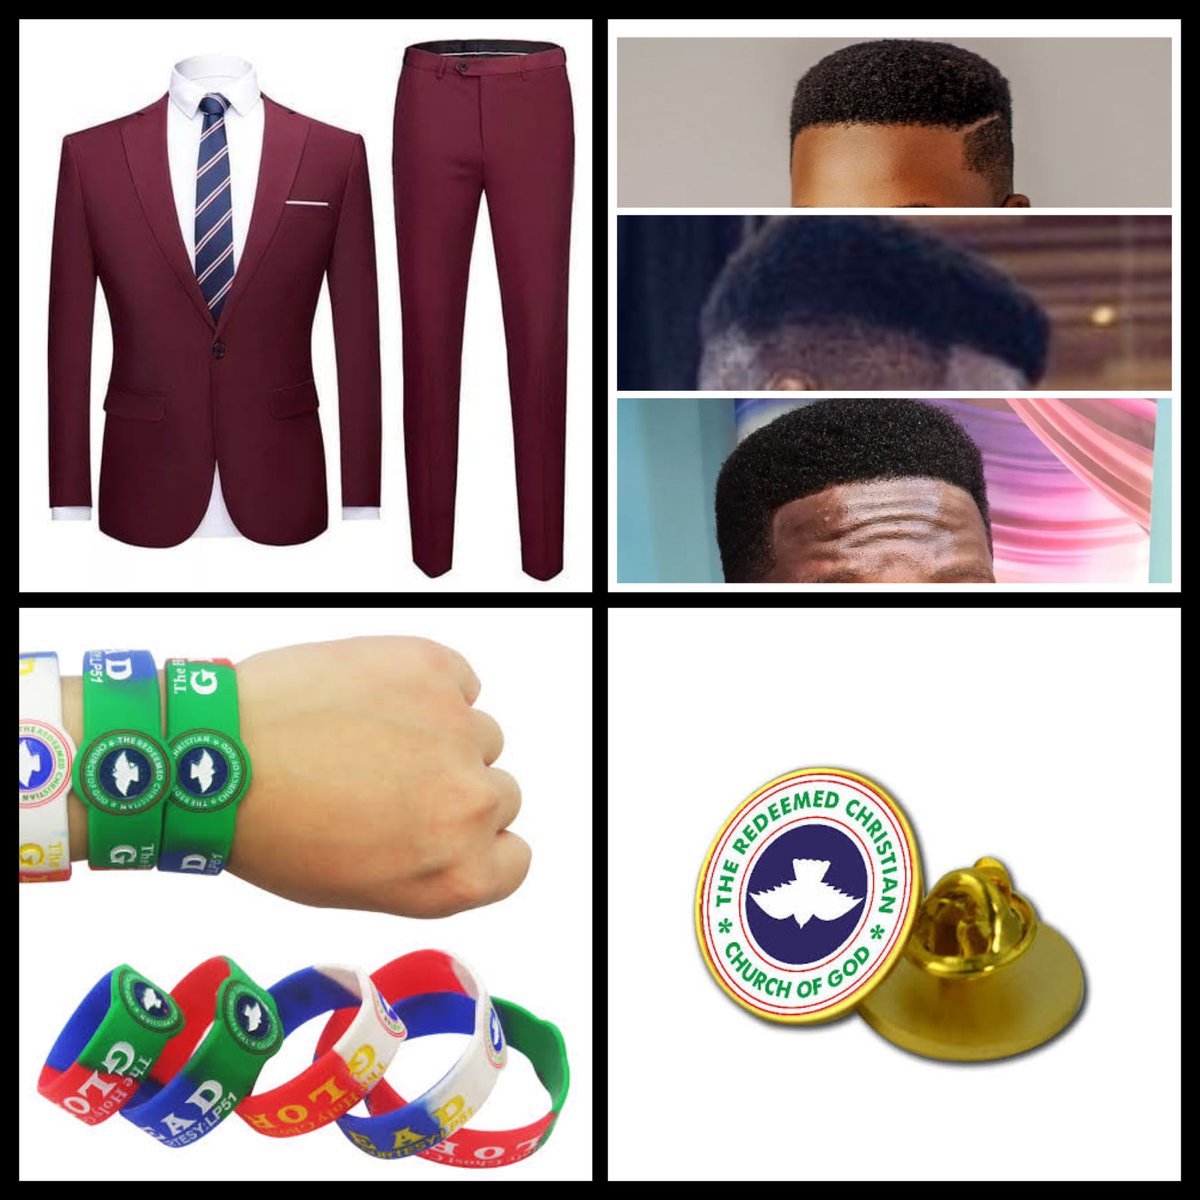 “RCCG PSF BROTHER” STARTER PACK 😆